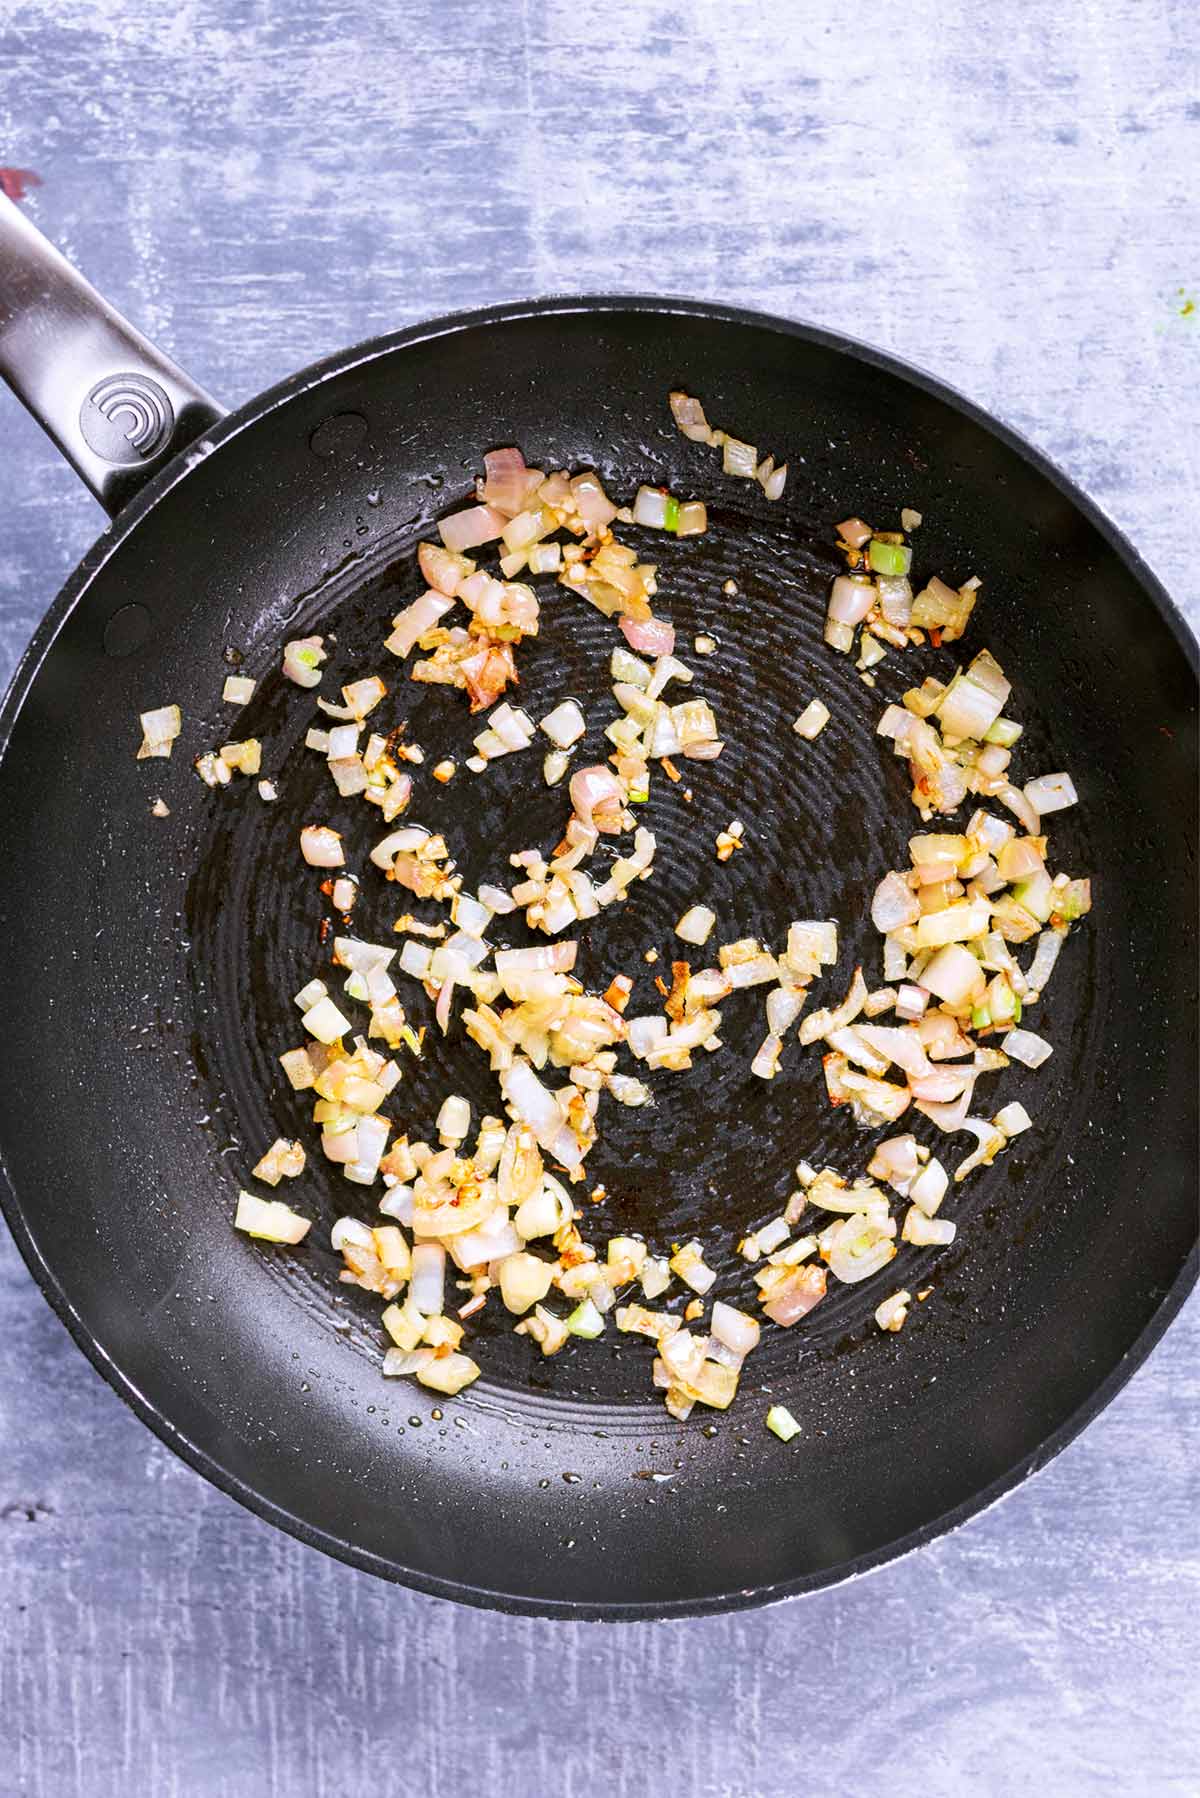 A frying pan with chopped onions cooking in it.